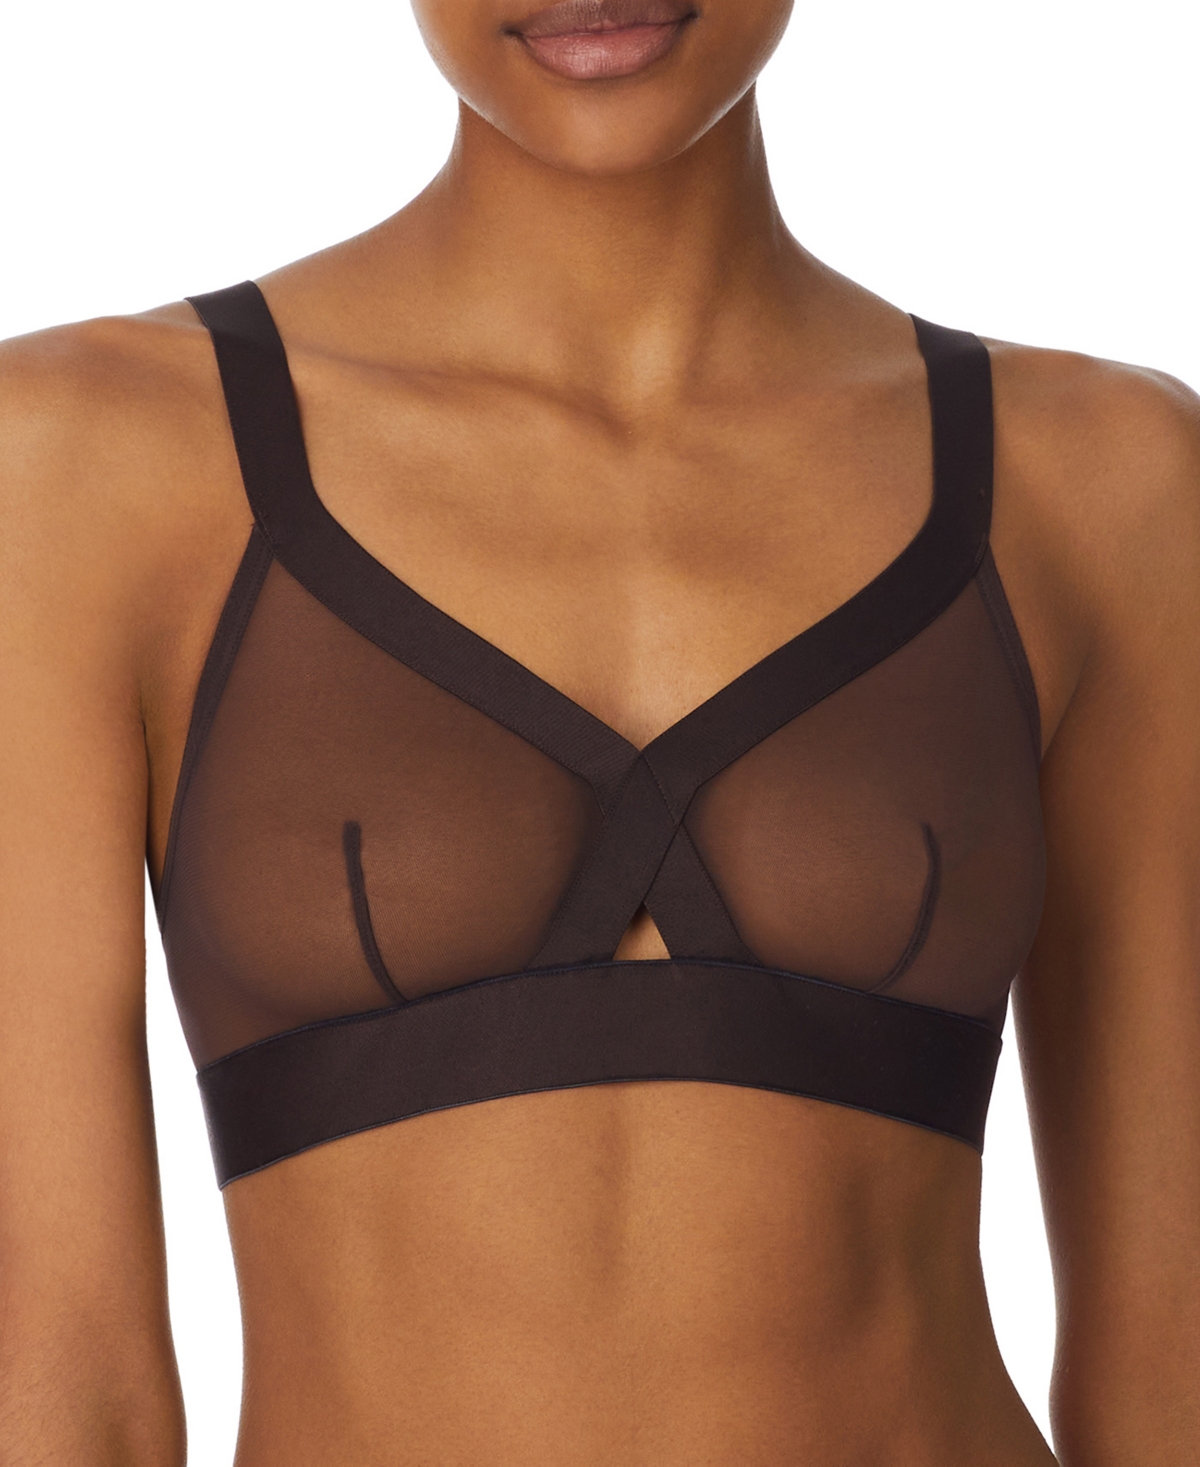 Dkny Table Tops Sheer Triangle Bra - Rosewood